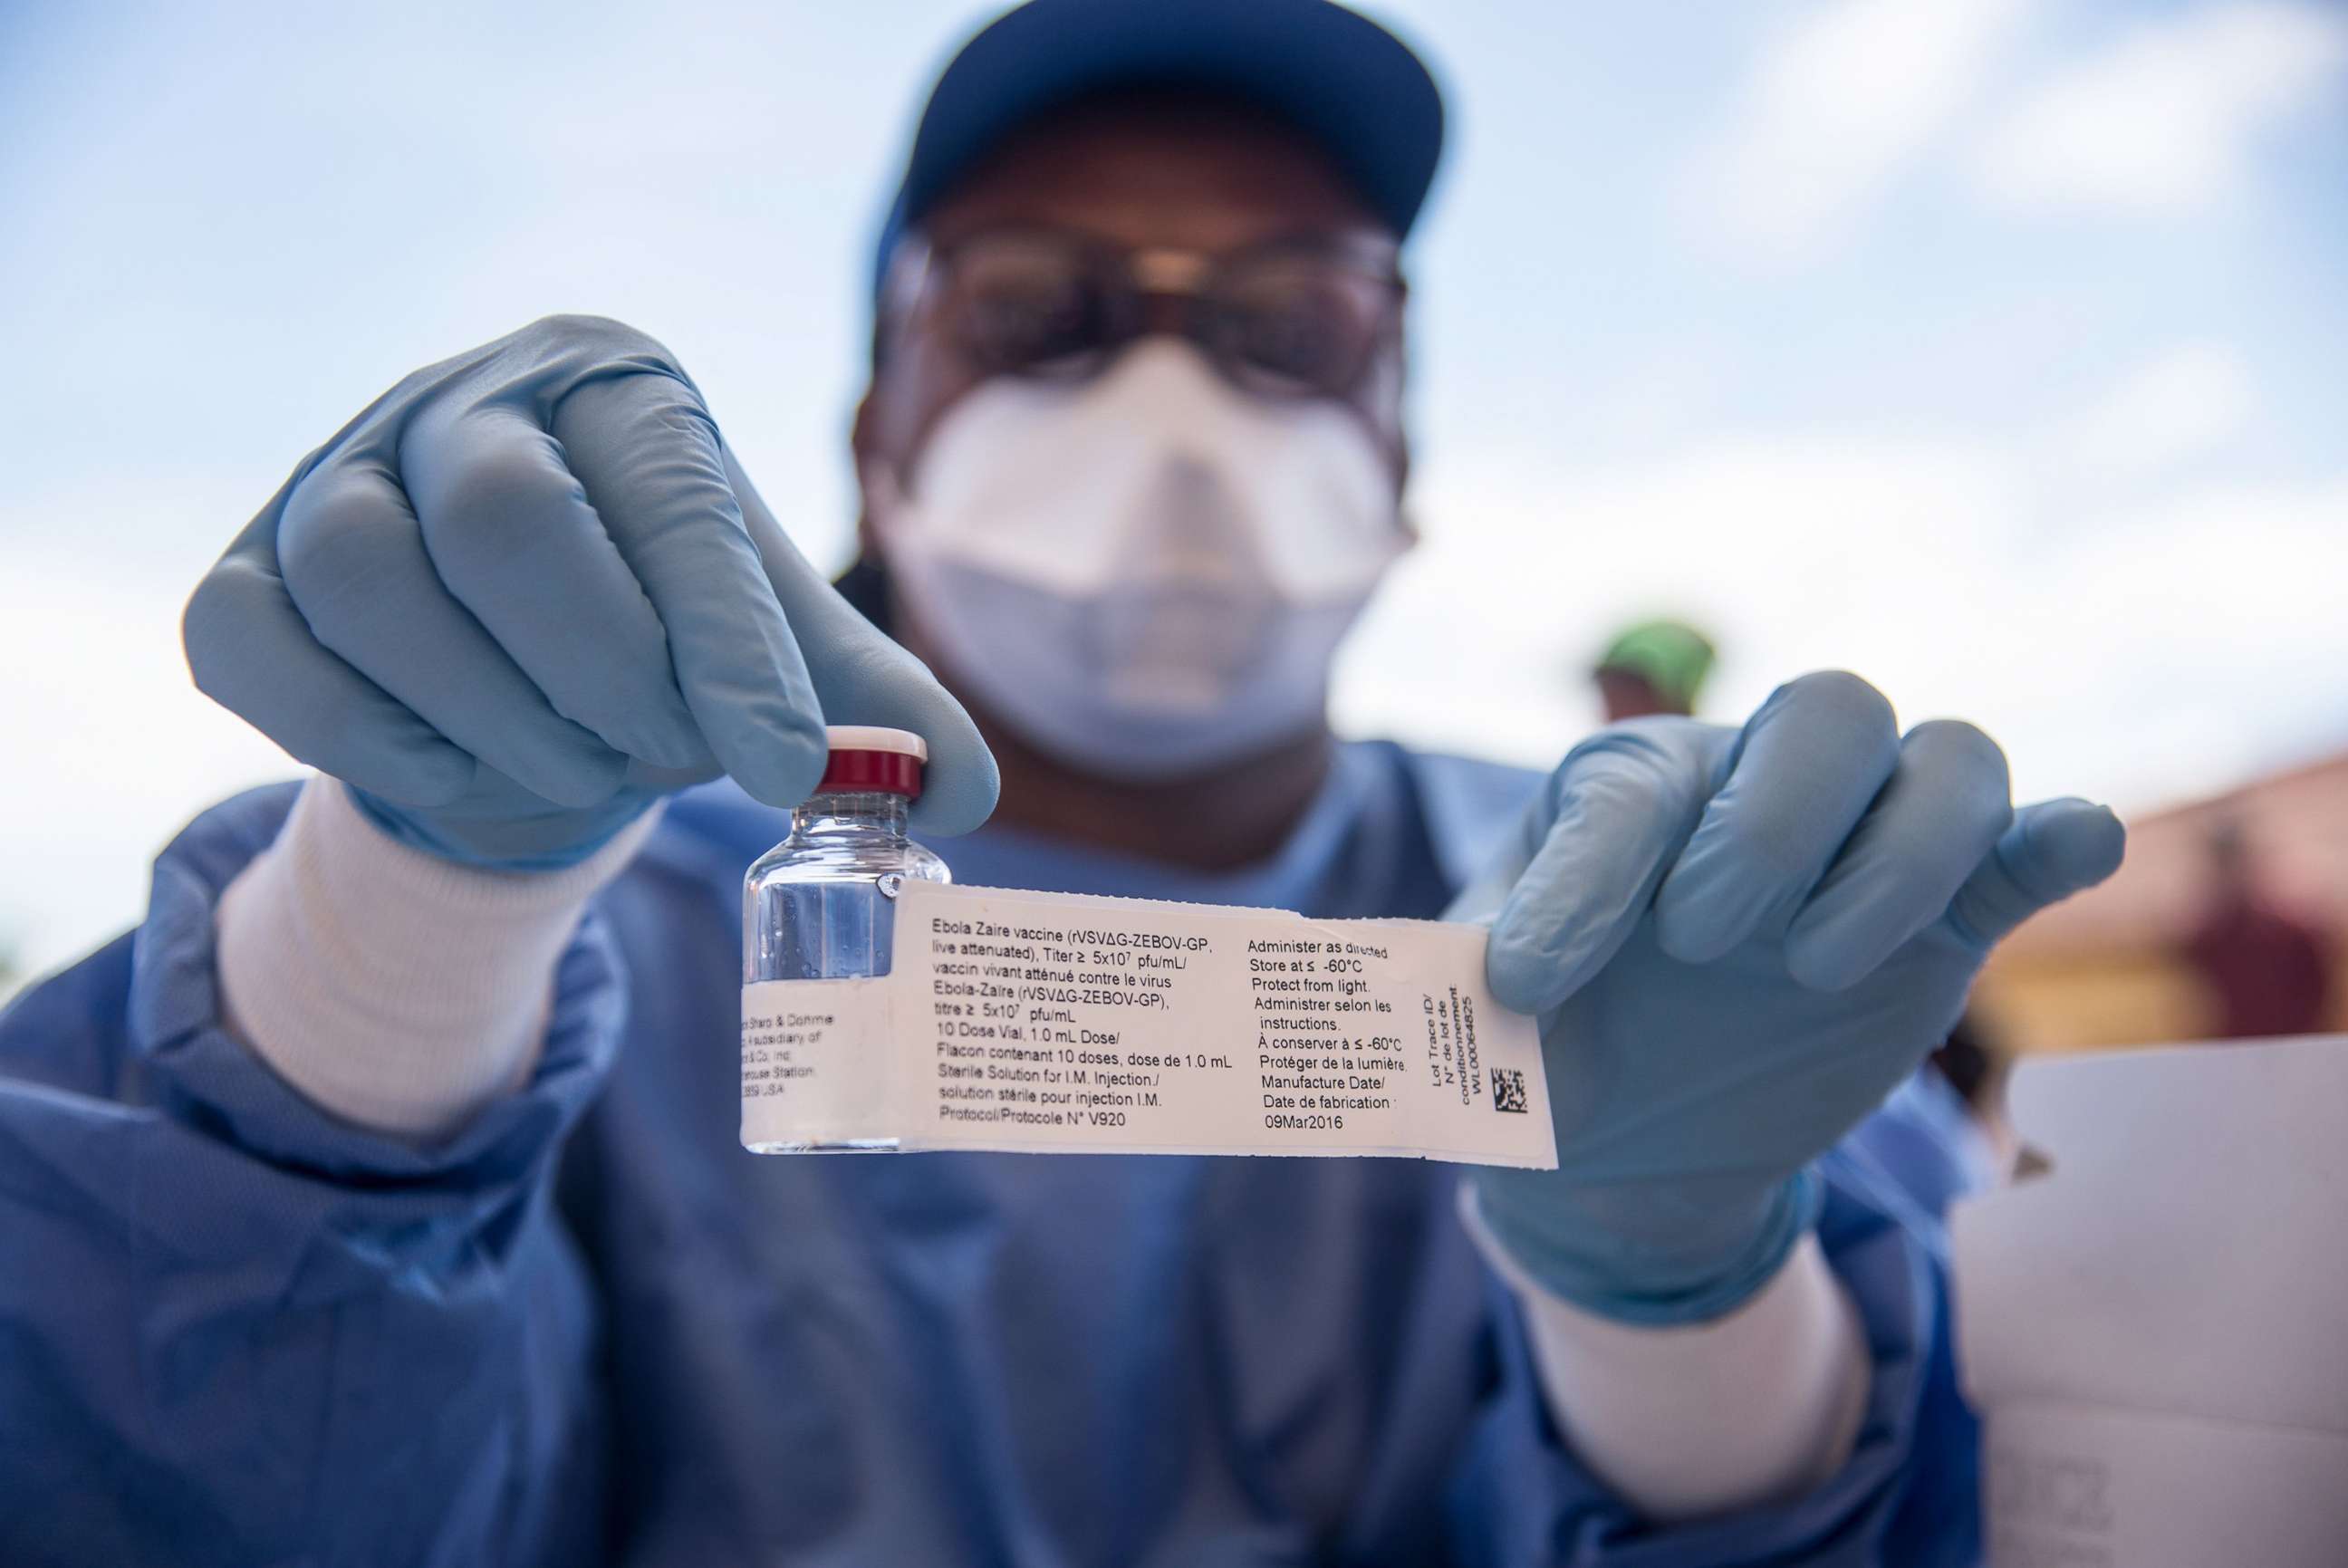 PHOTO: In this May 21, 2018, file photo, a nurse working with the World Health Organization (WHO) shows a bottle containing Ebola vaccine in the town of Mbandaka, Democratic Republic of Congo, during the launch of the Ebola vaccination campaign.